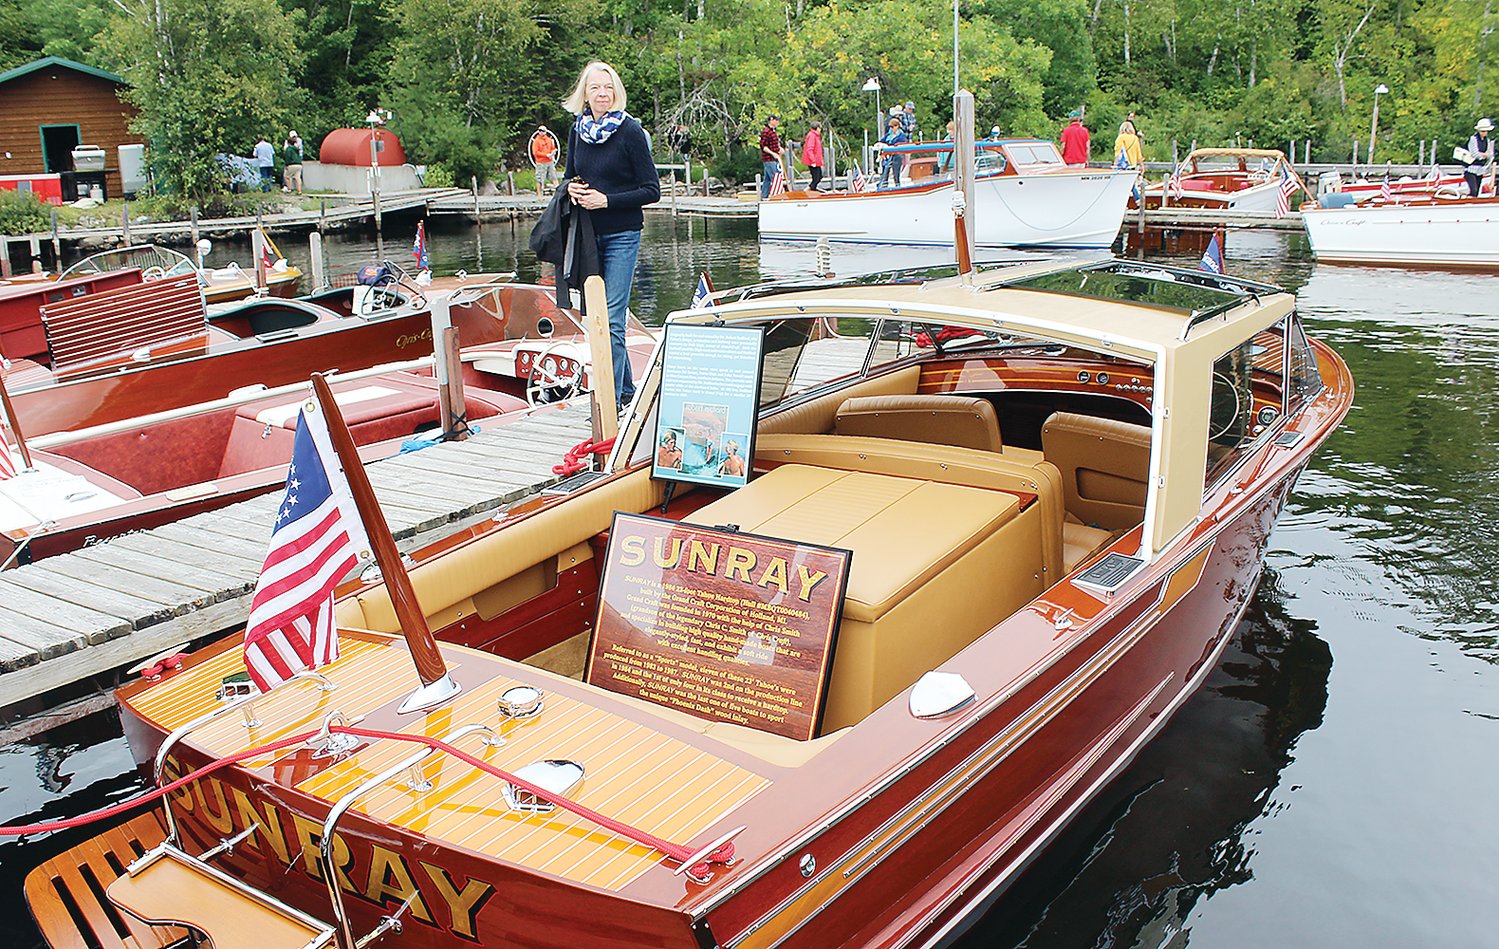 The newly-restored “Sunray,” once owned by the actor Robert Redford, was a big hit at this past Sunday’s boat show.